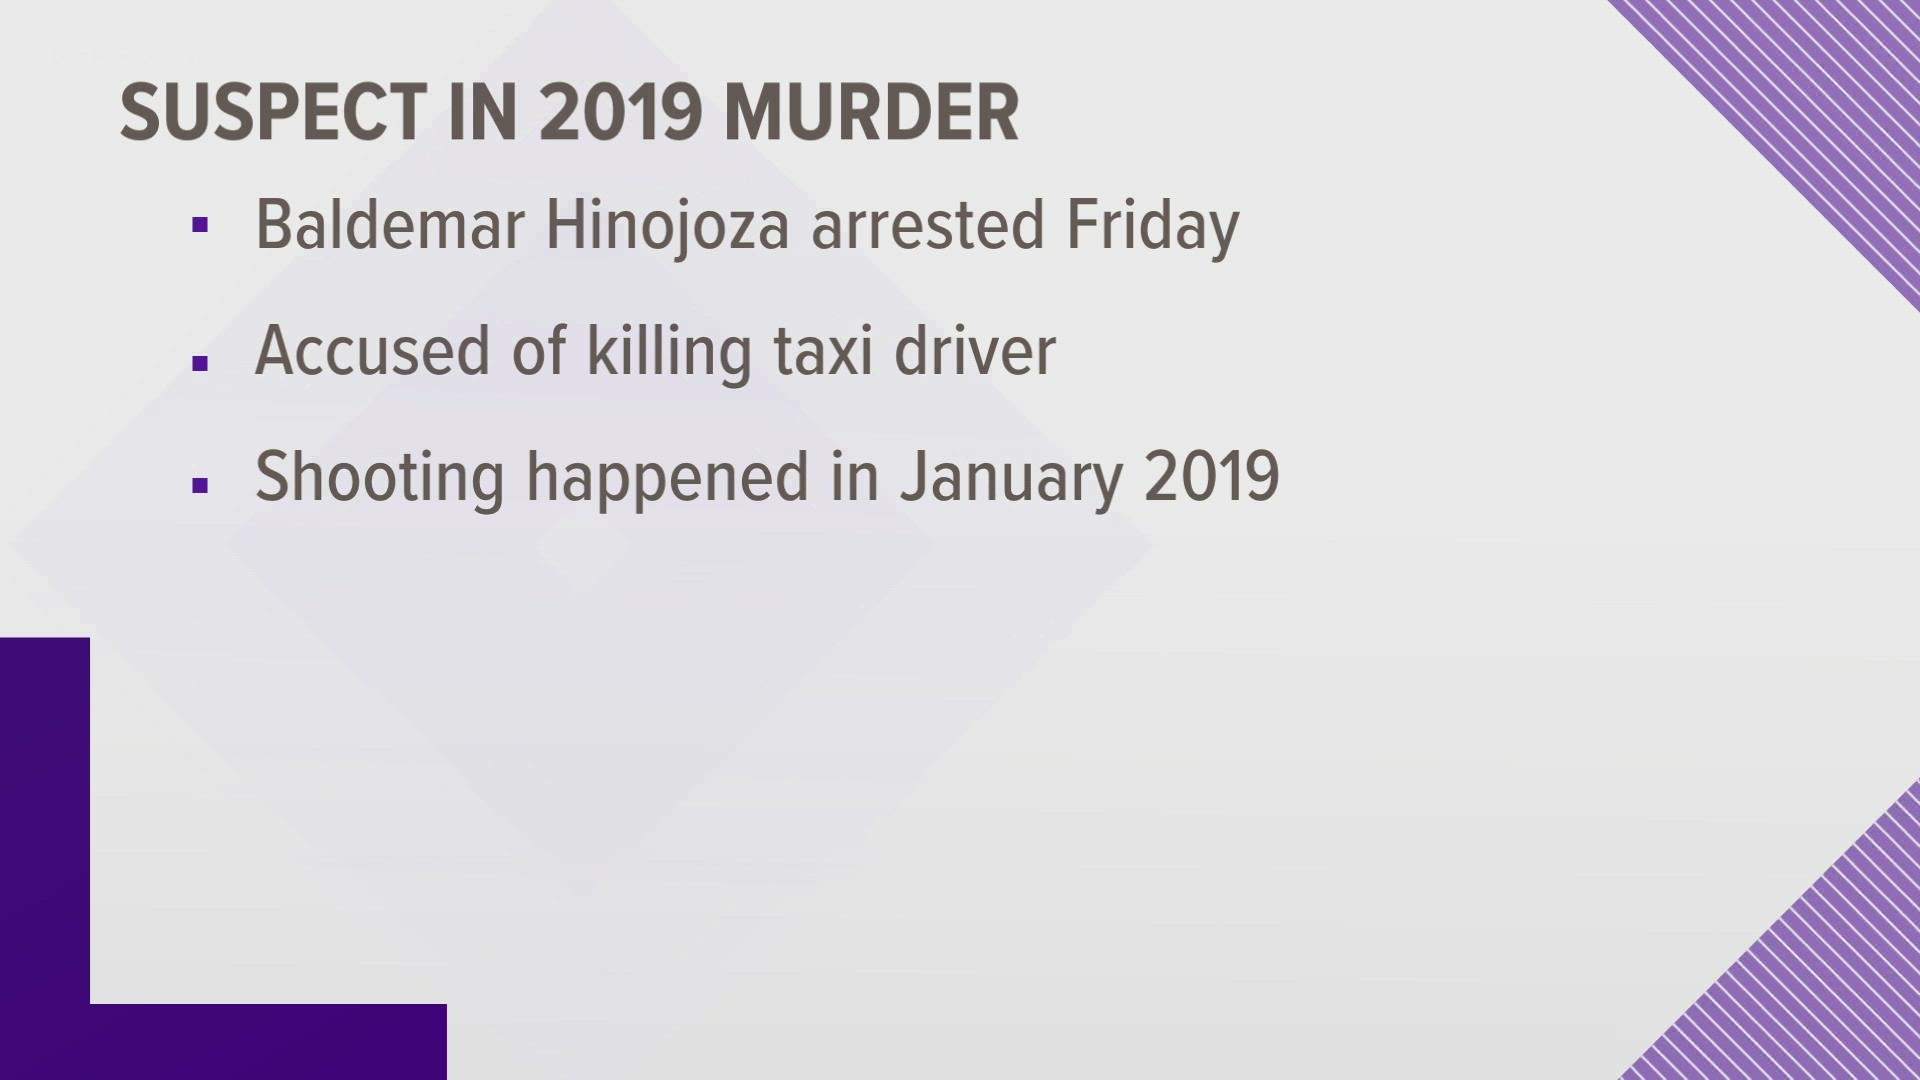 The suspect was charged in the murder of a Somali immigrant who was found shot on Jan. 17, 2019.